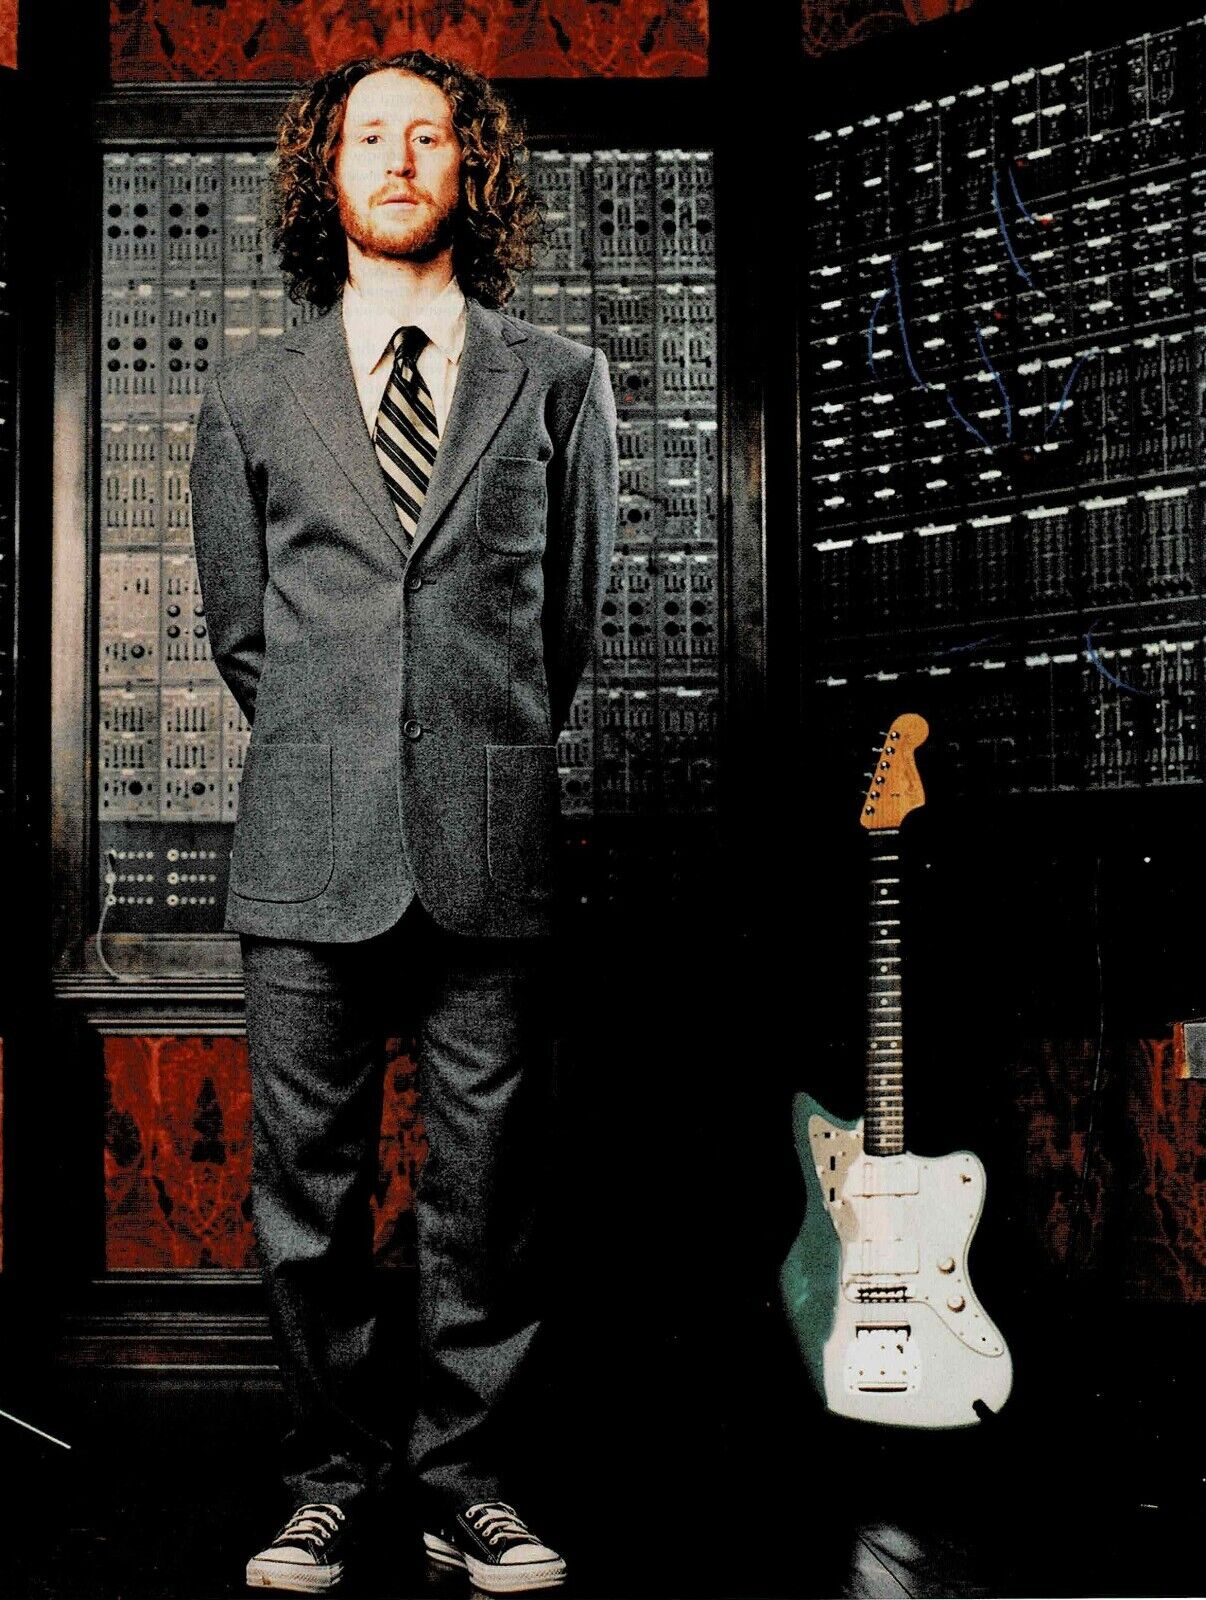 Mike Einziger of INCUBUS - Music Print Ad Photo - 2007